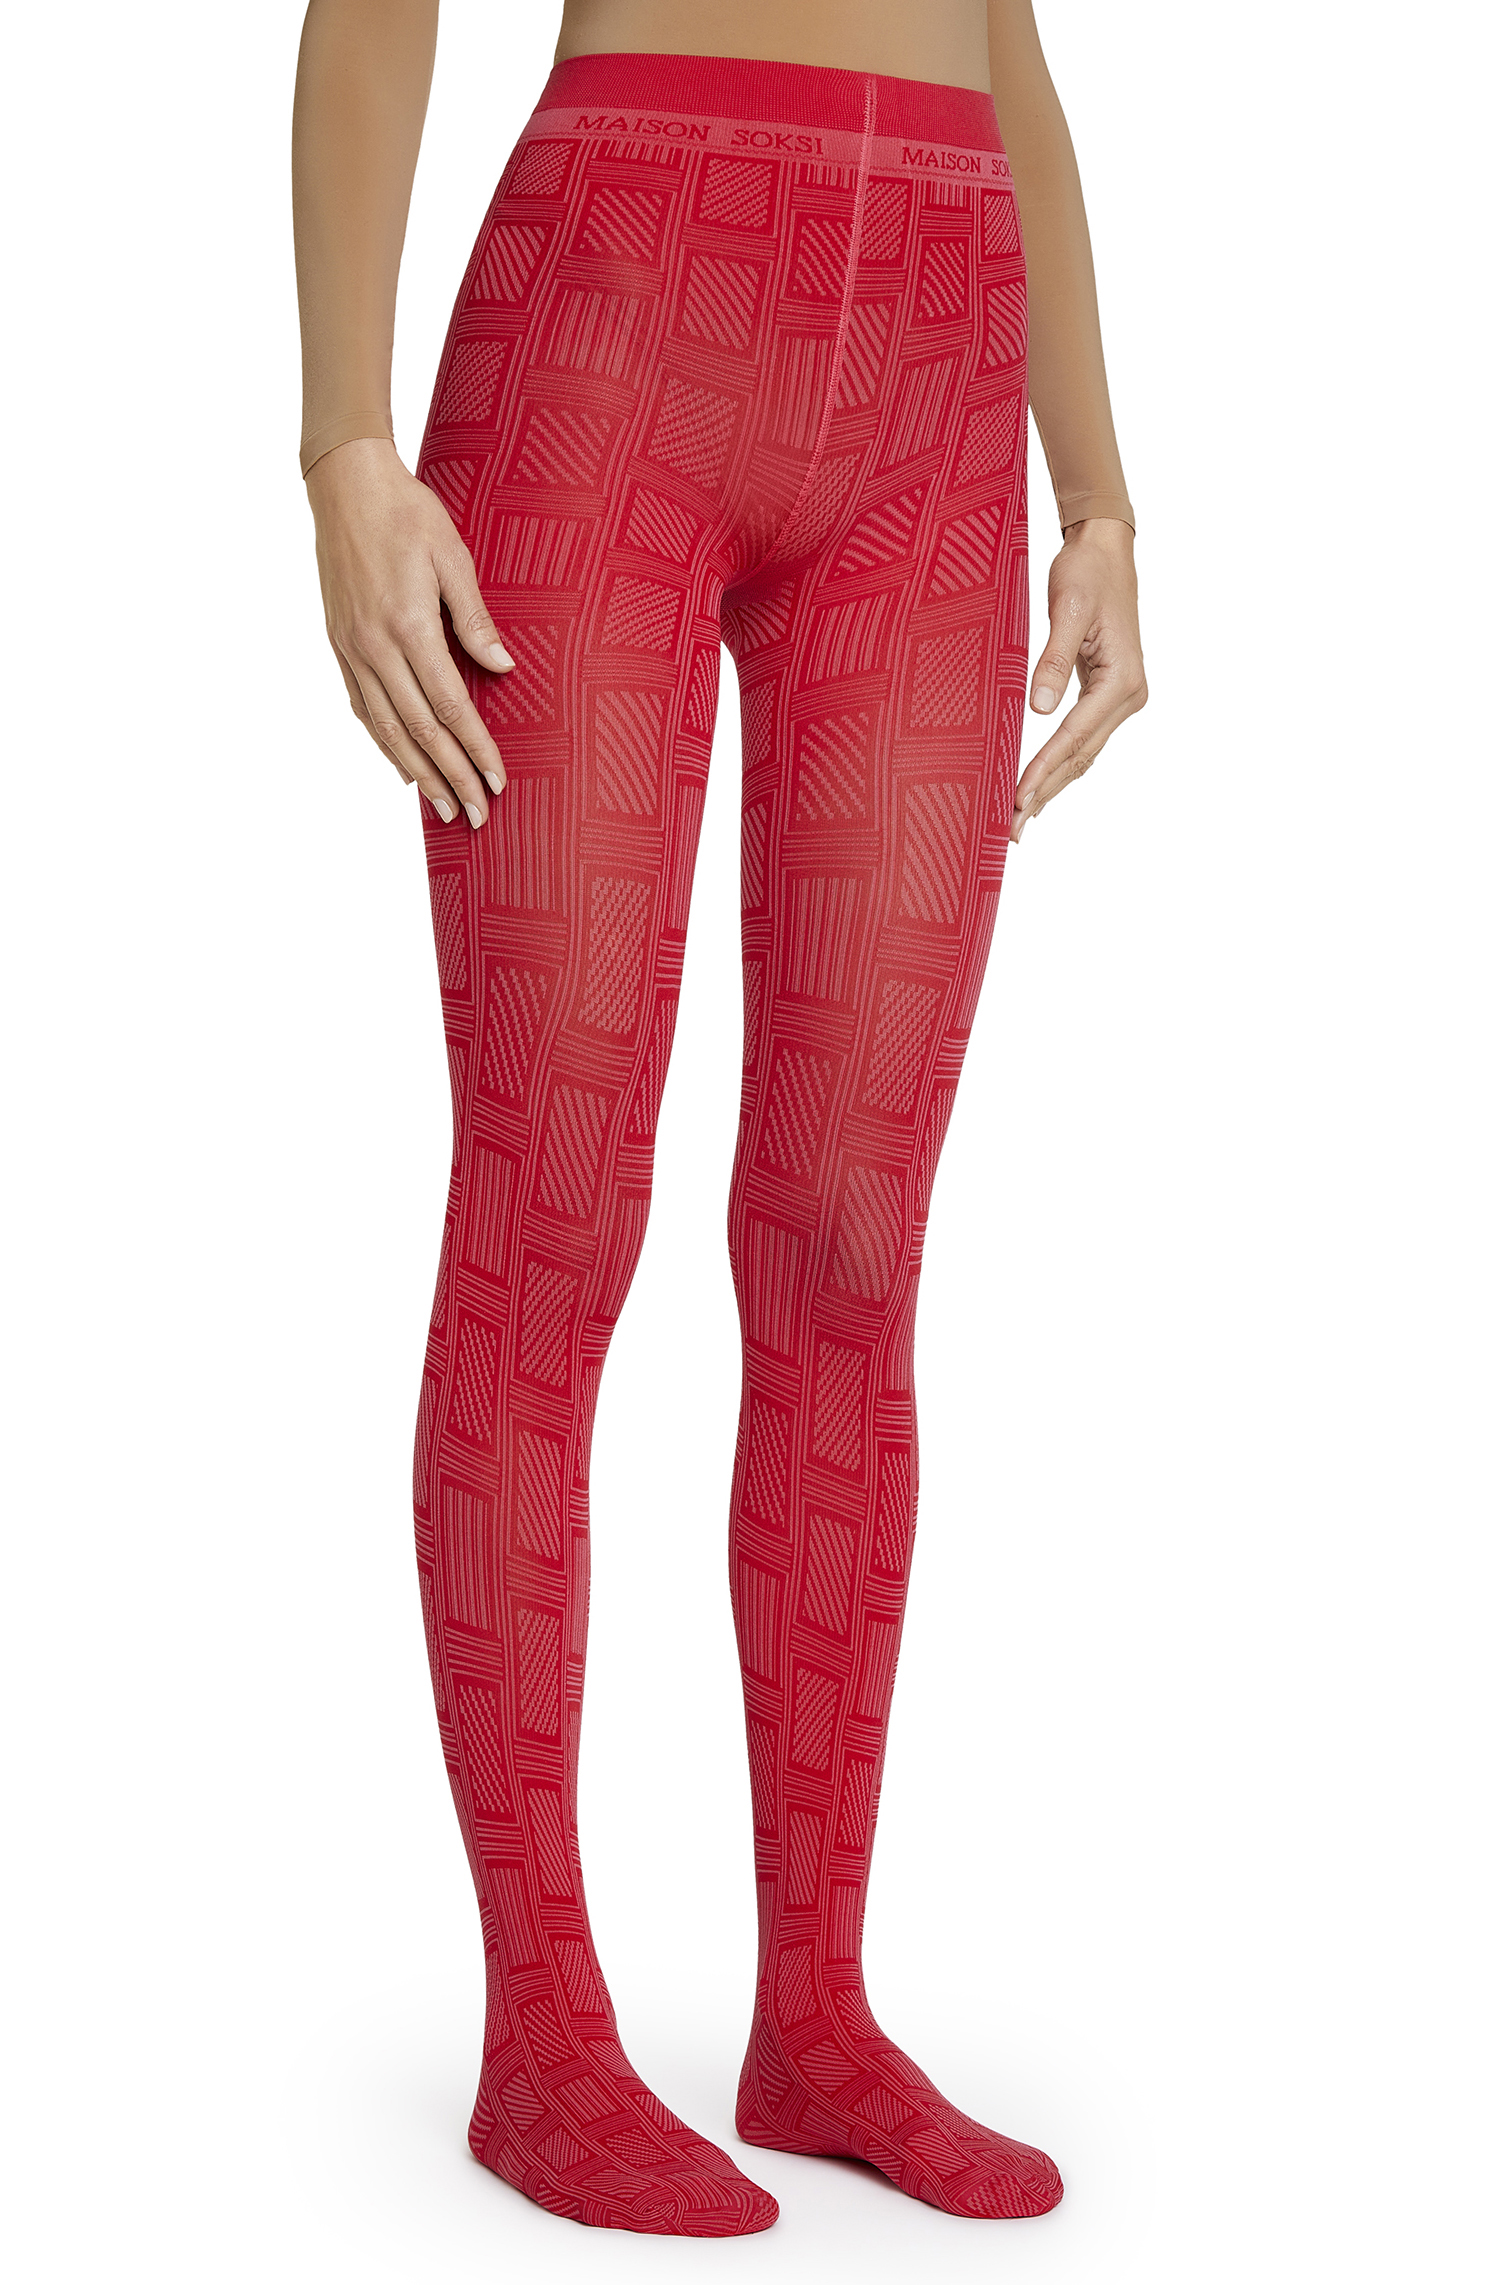 Millennium Women's capri leggings with writing: for sale at 9.99€ on  Mecshopping.it